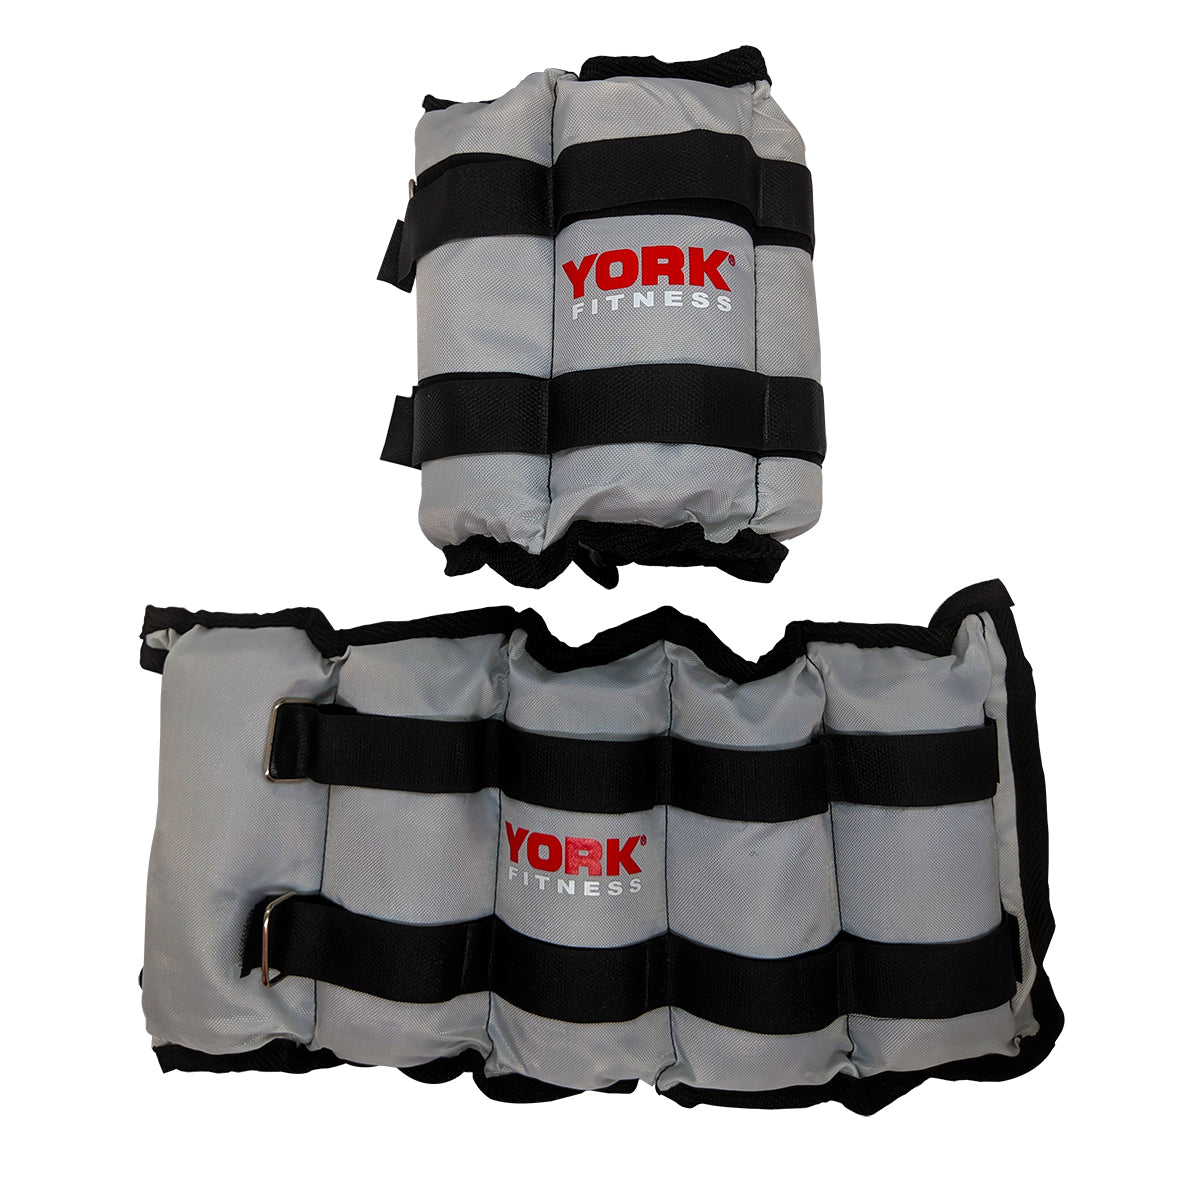 York Fitness 2 x Ankle Wrist & Weights, York Fitness